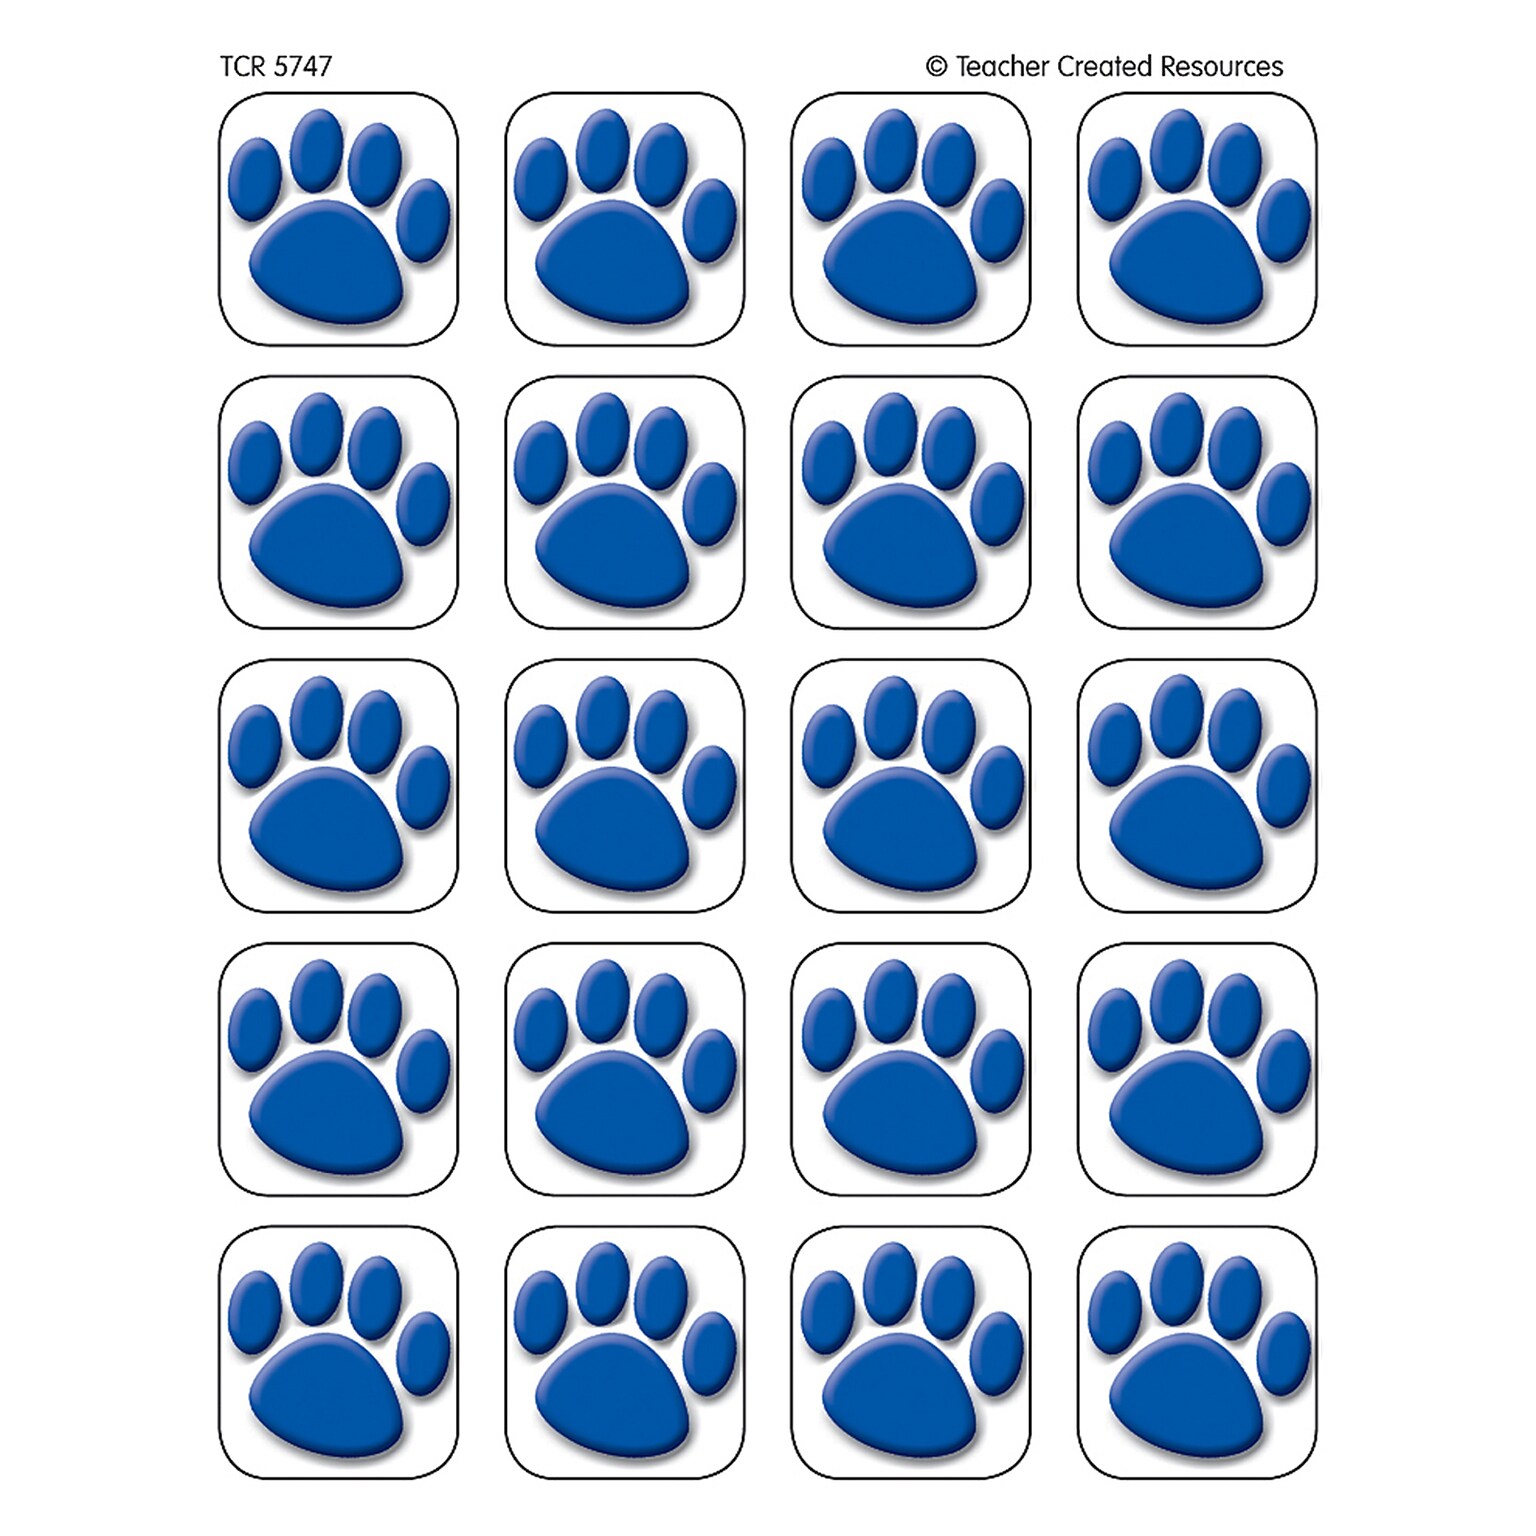 Teacher Created Resources Paw Prints Accents Stickers, Blue (TCR5747)